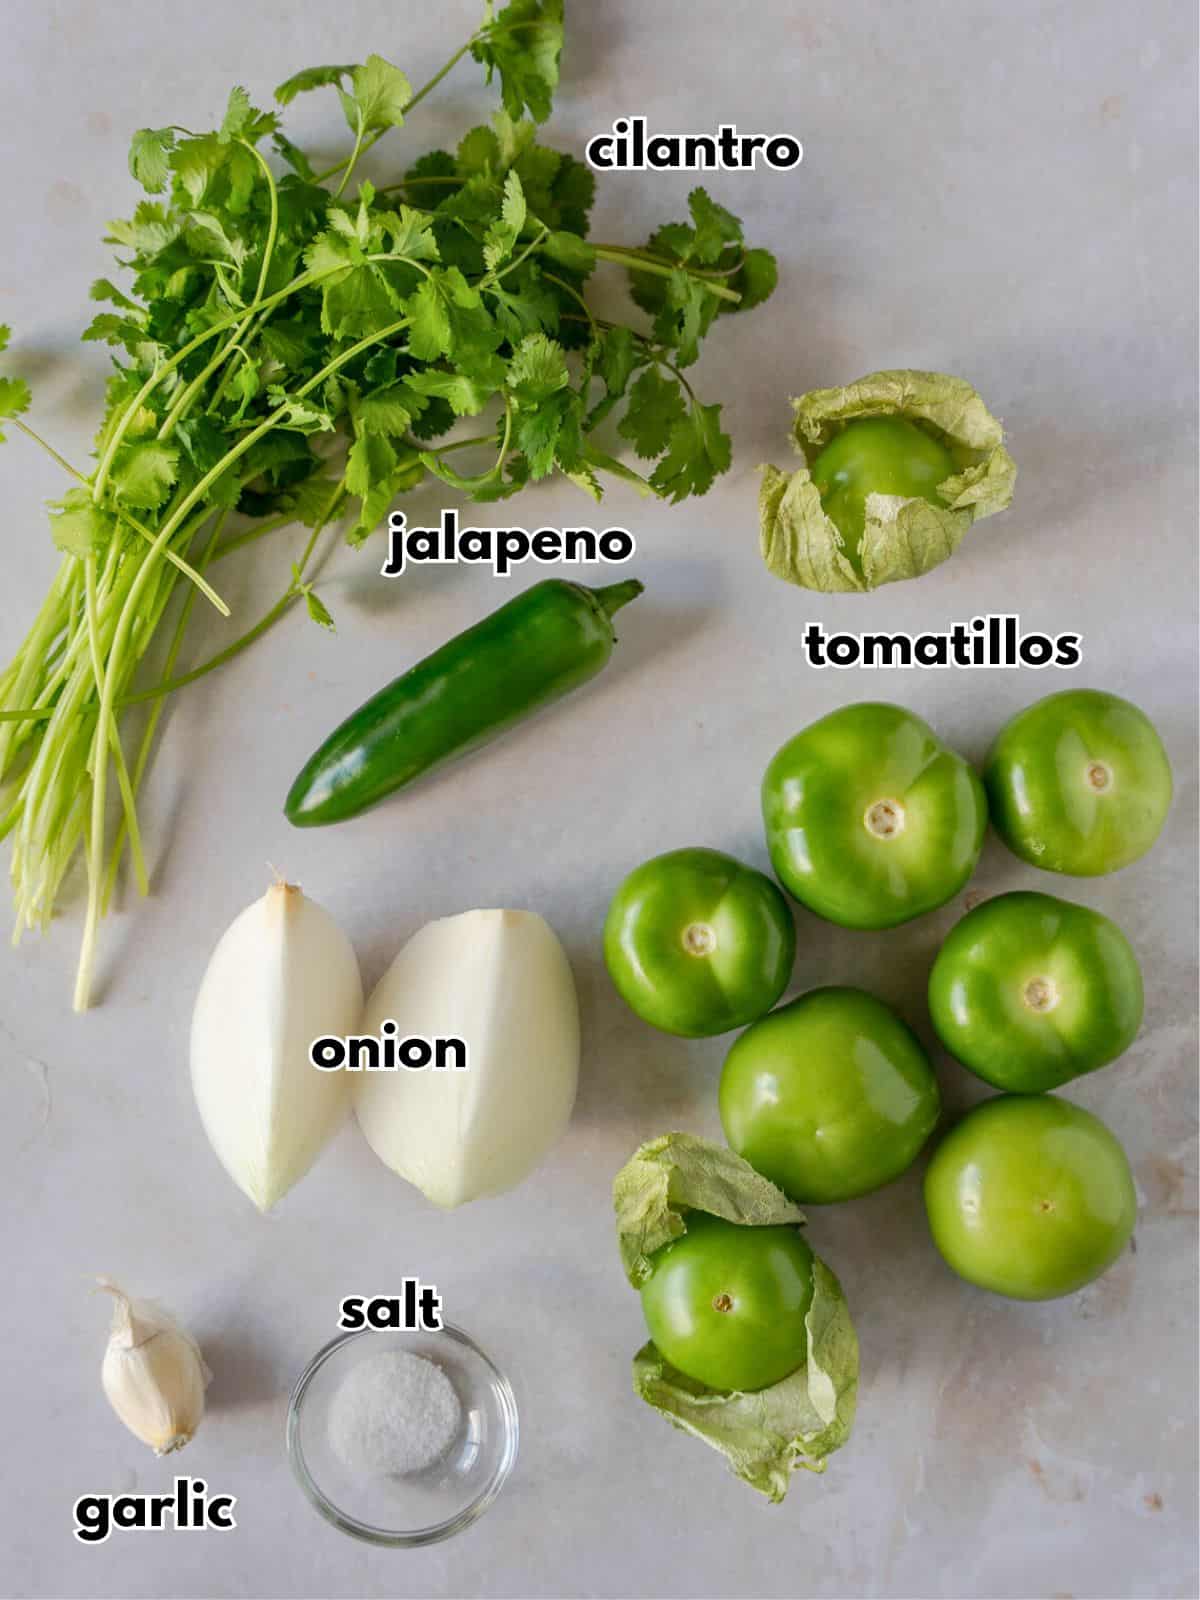 Ingredients with labels: cilantro, jalapeno, tomatillos, onion, garlic, and salt.